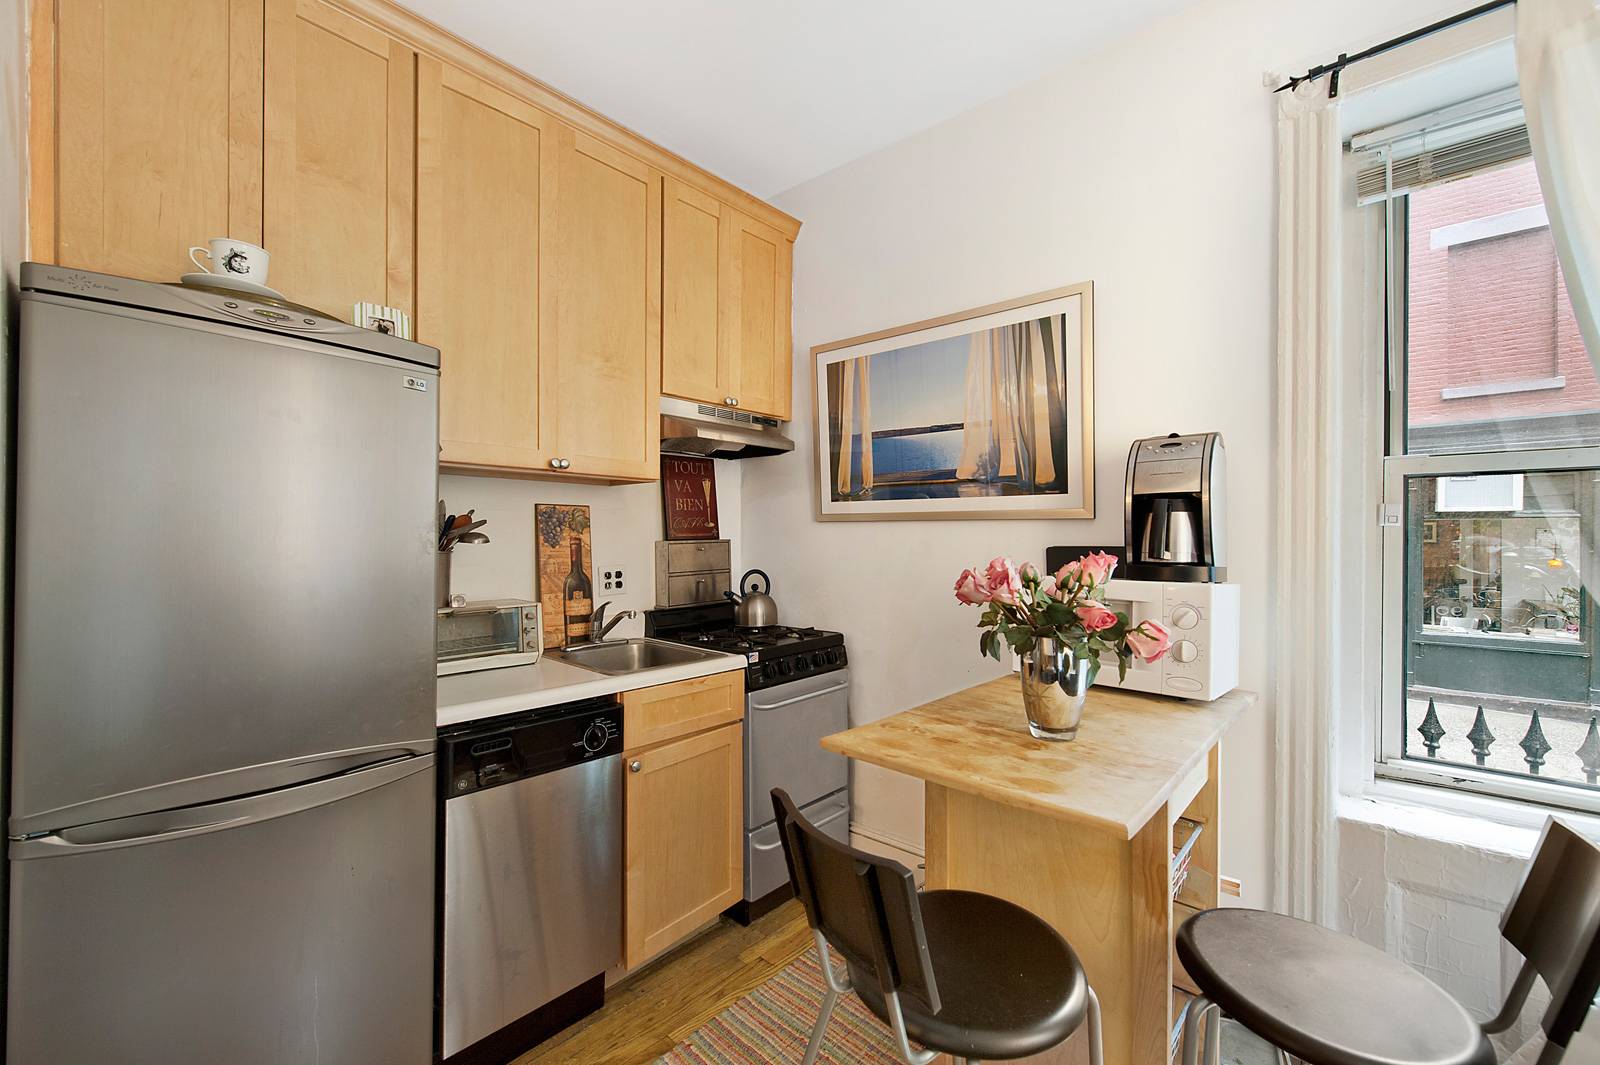 Rental: Renovated Studio in Prime Meat Packing District - Sunny, Laundry & Elevator - Close to Subway & Buses - Great Deal!